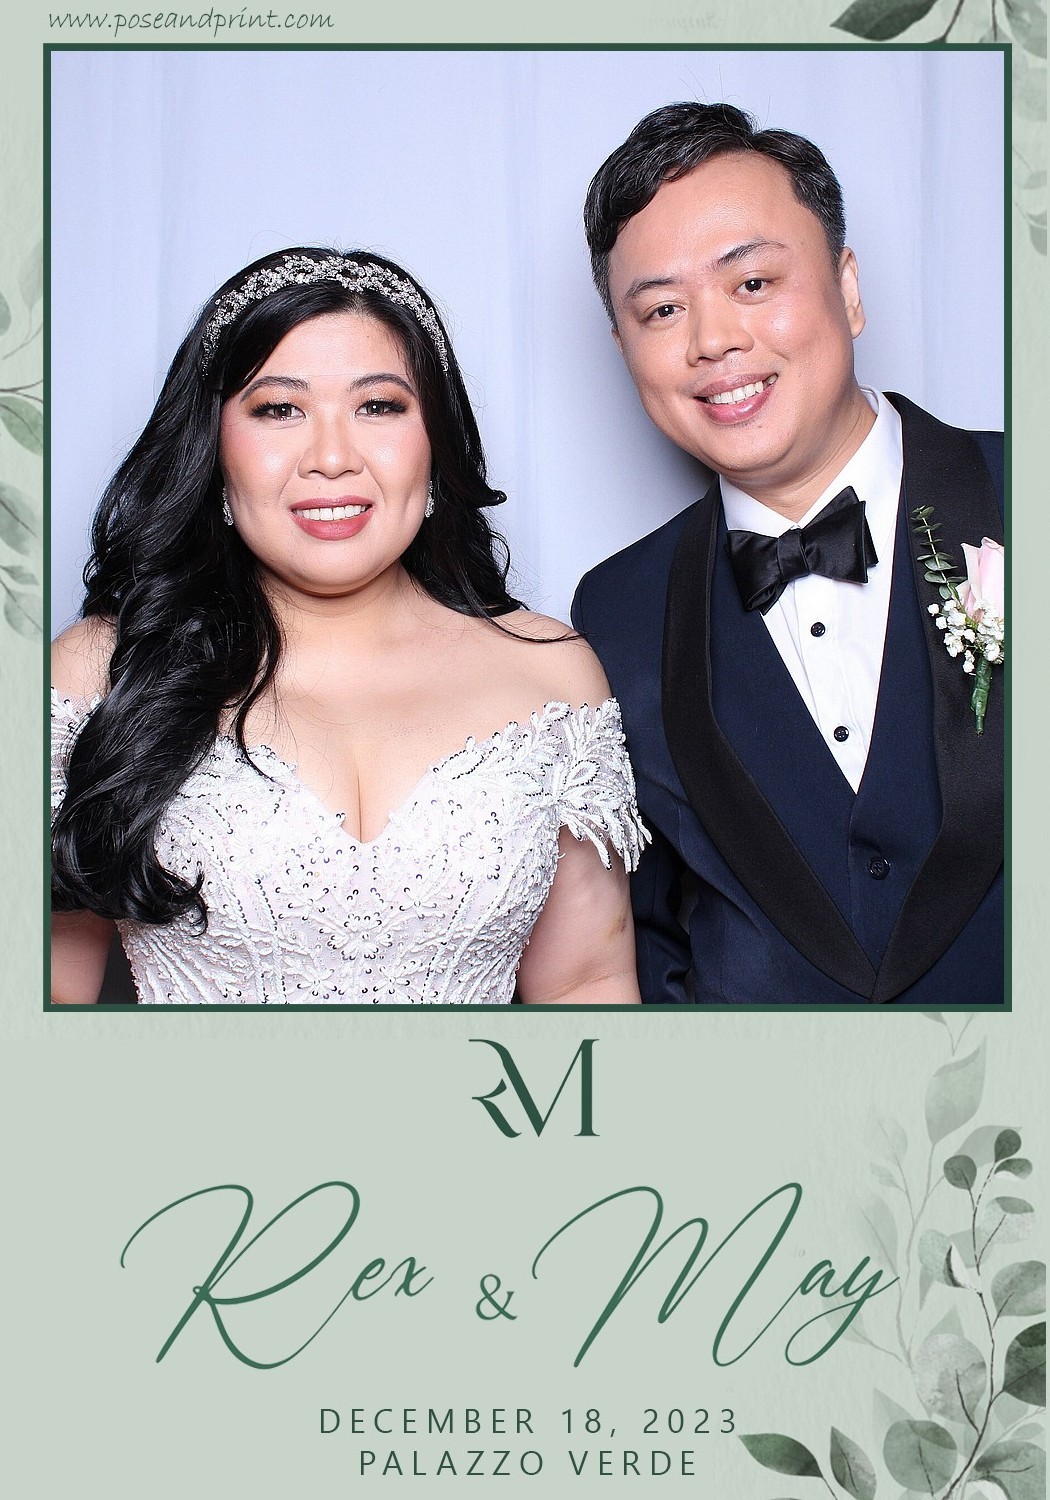 Rex and May’s Wedding – Toonify Prints